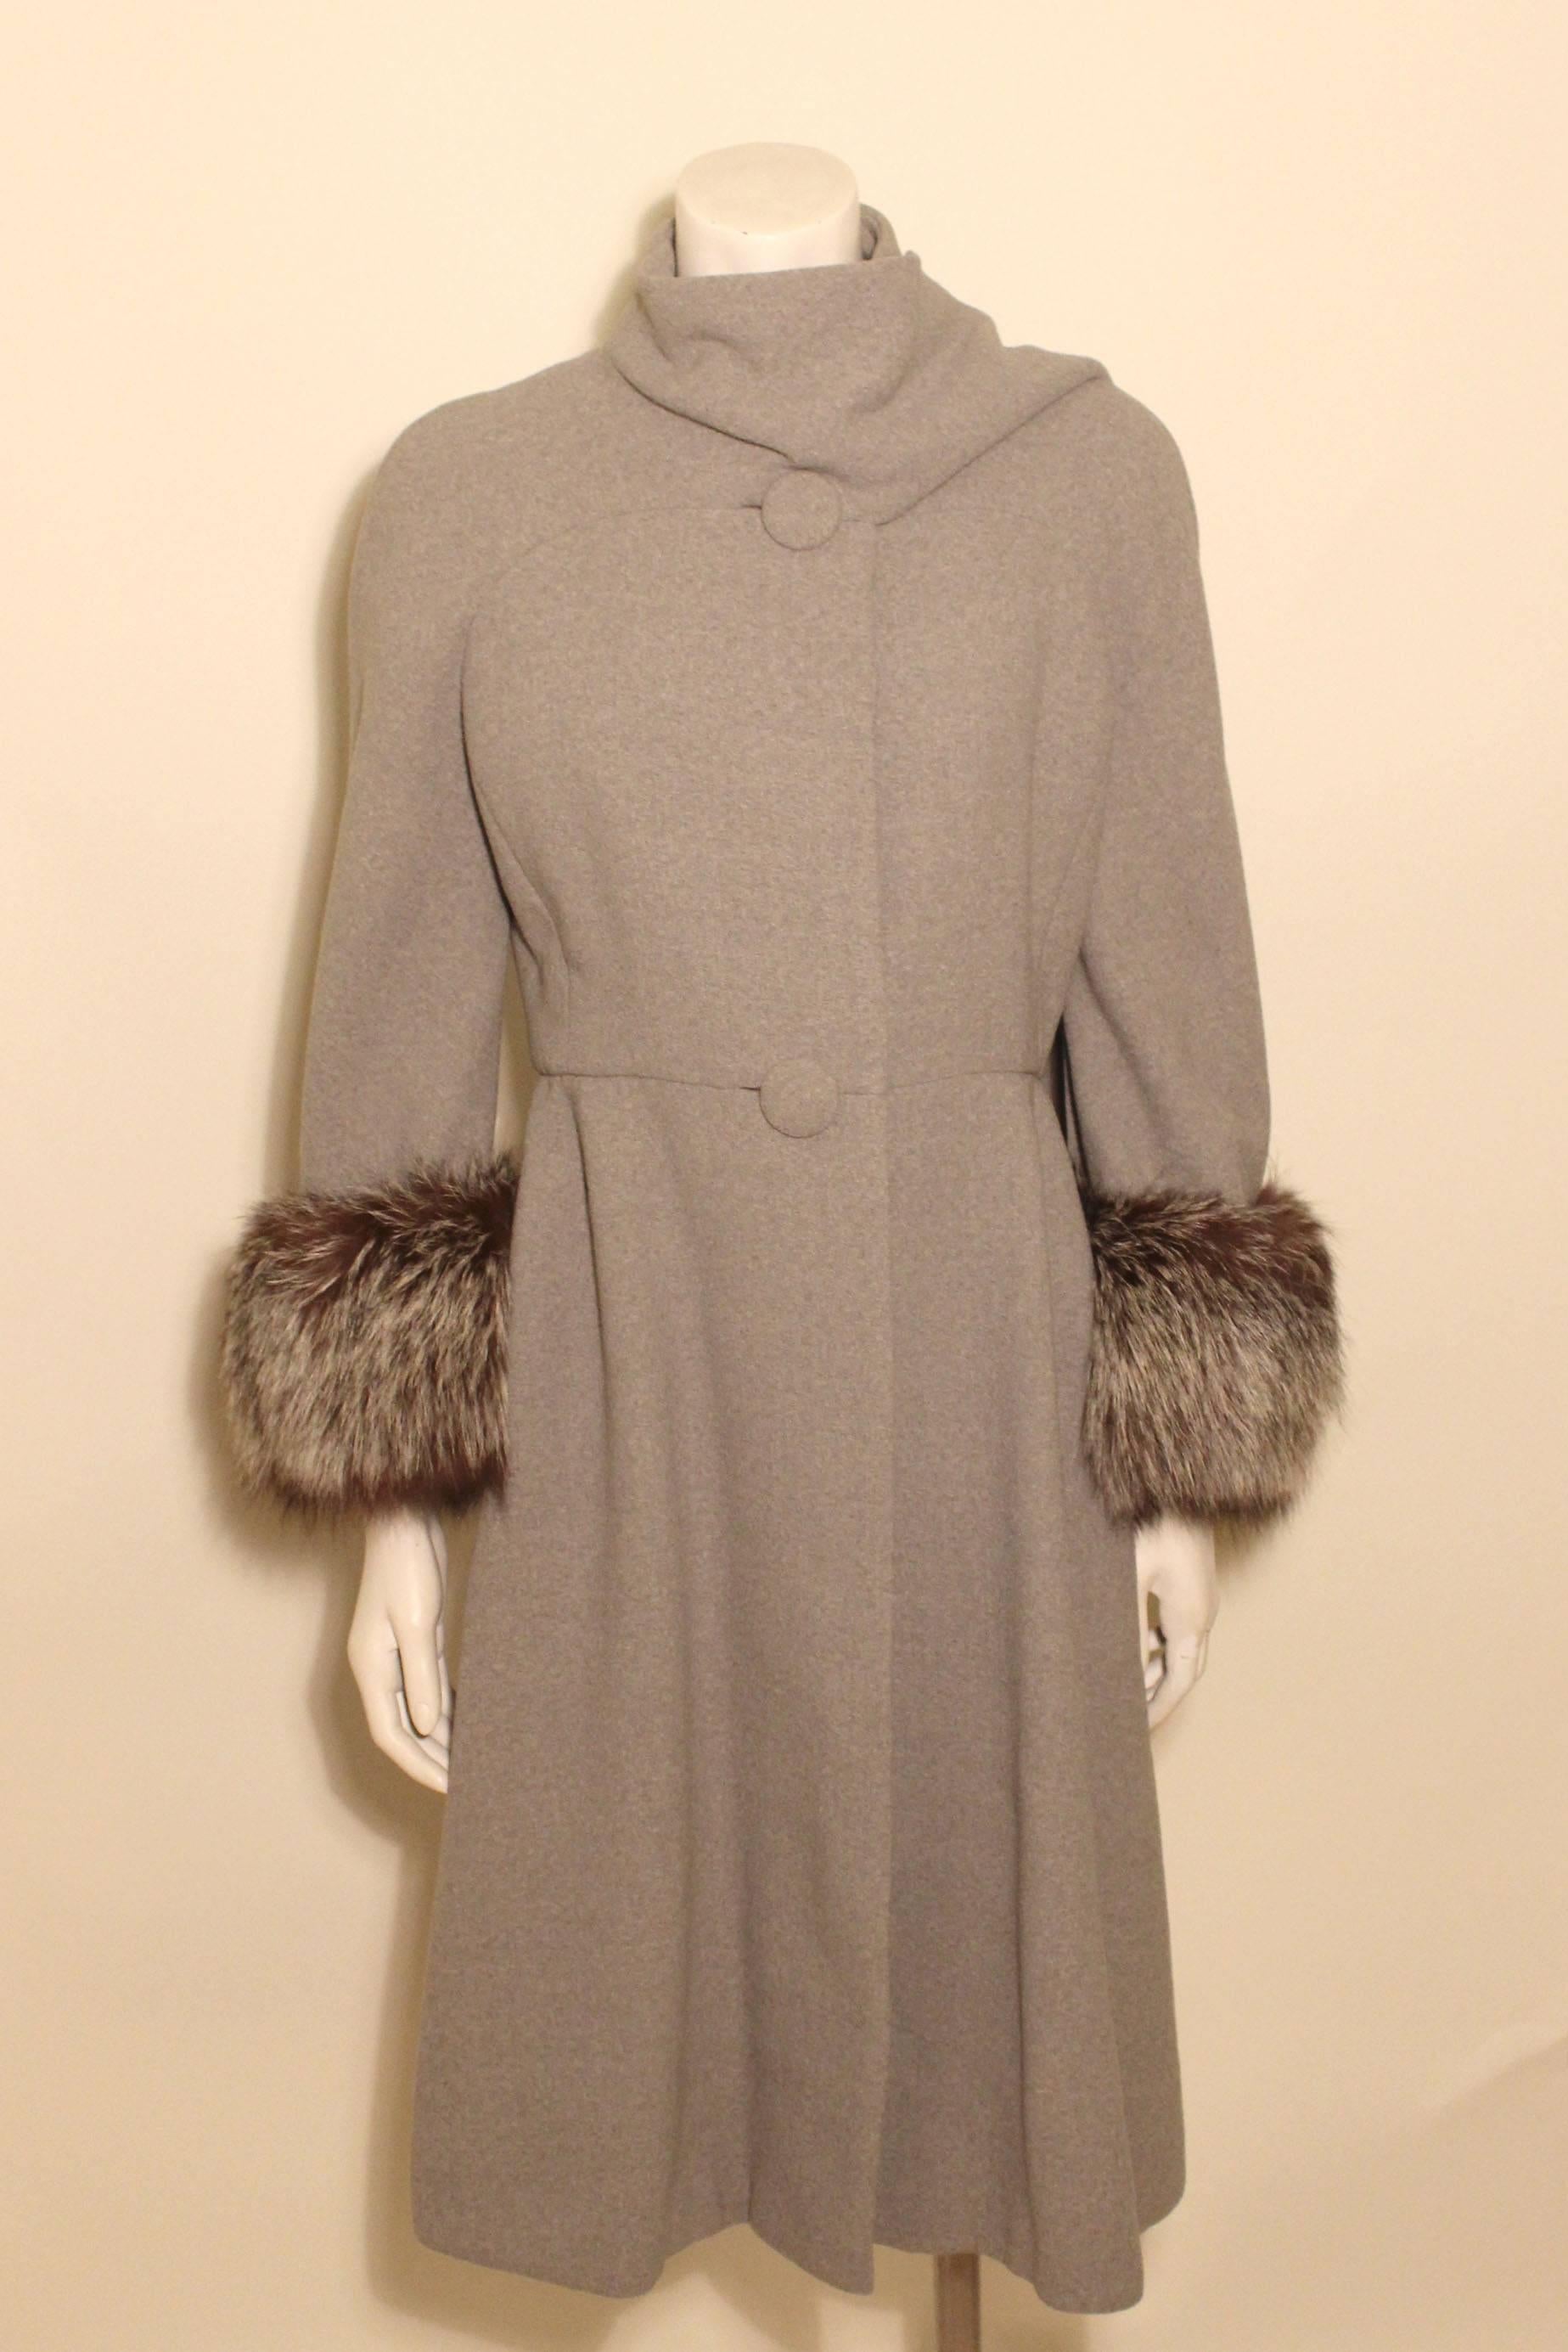 This coat has a chic and timeless design with a high draped neckline ending in a muffler. The shape is slightly A-Line with covered buttons.